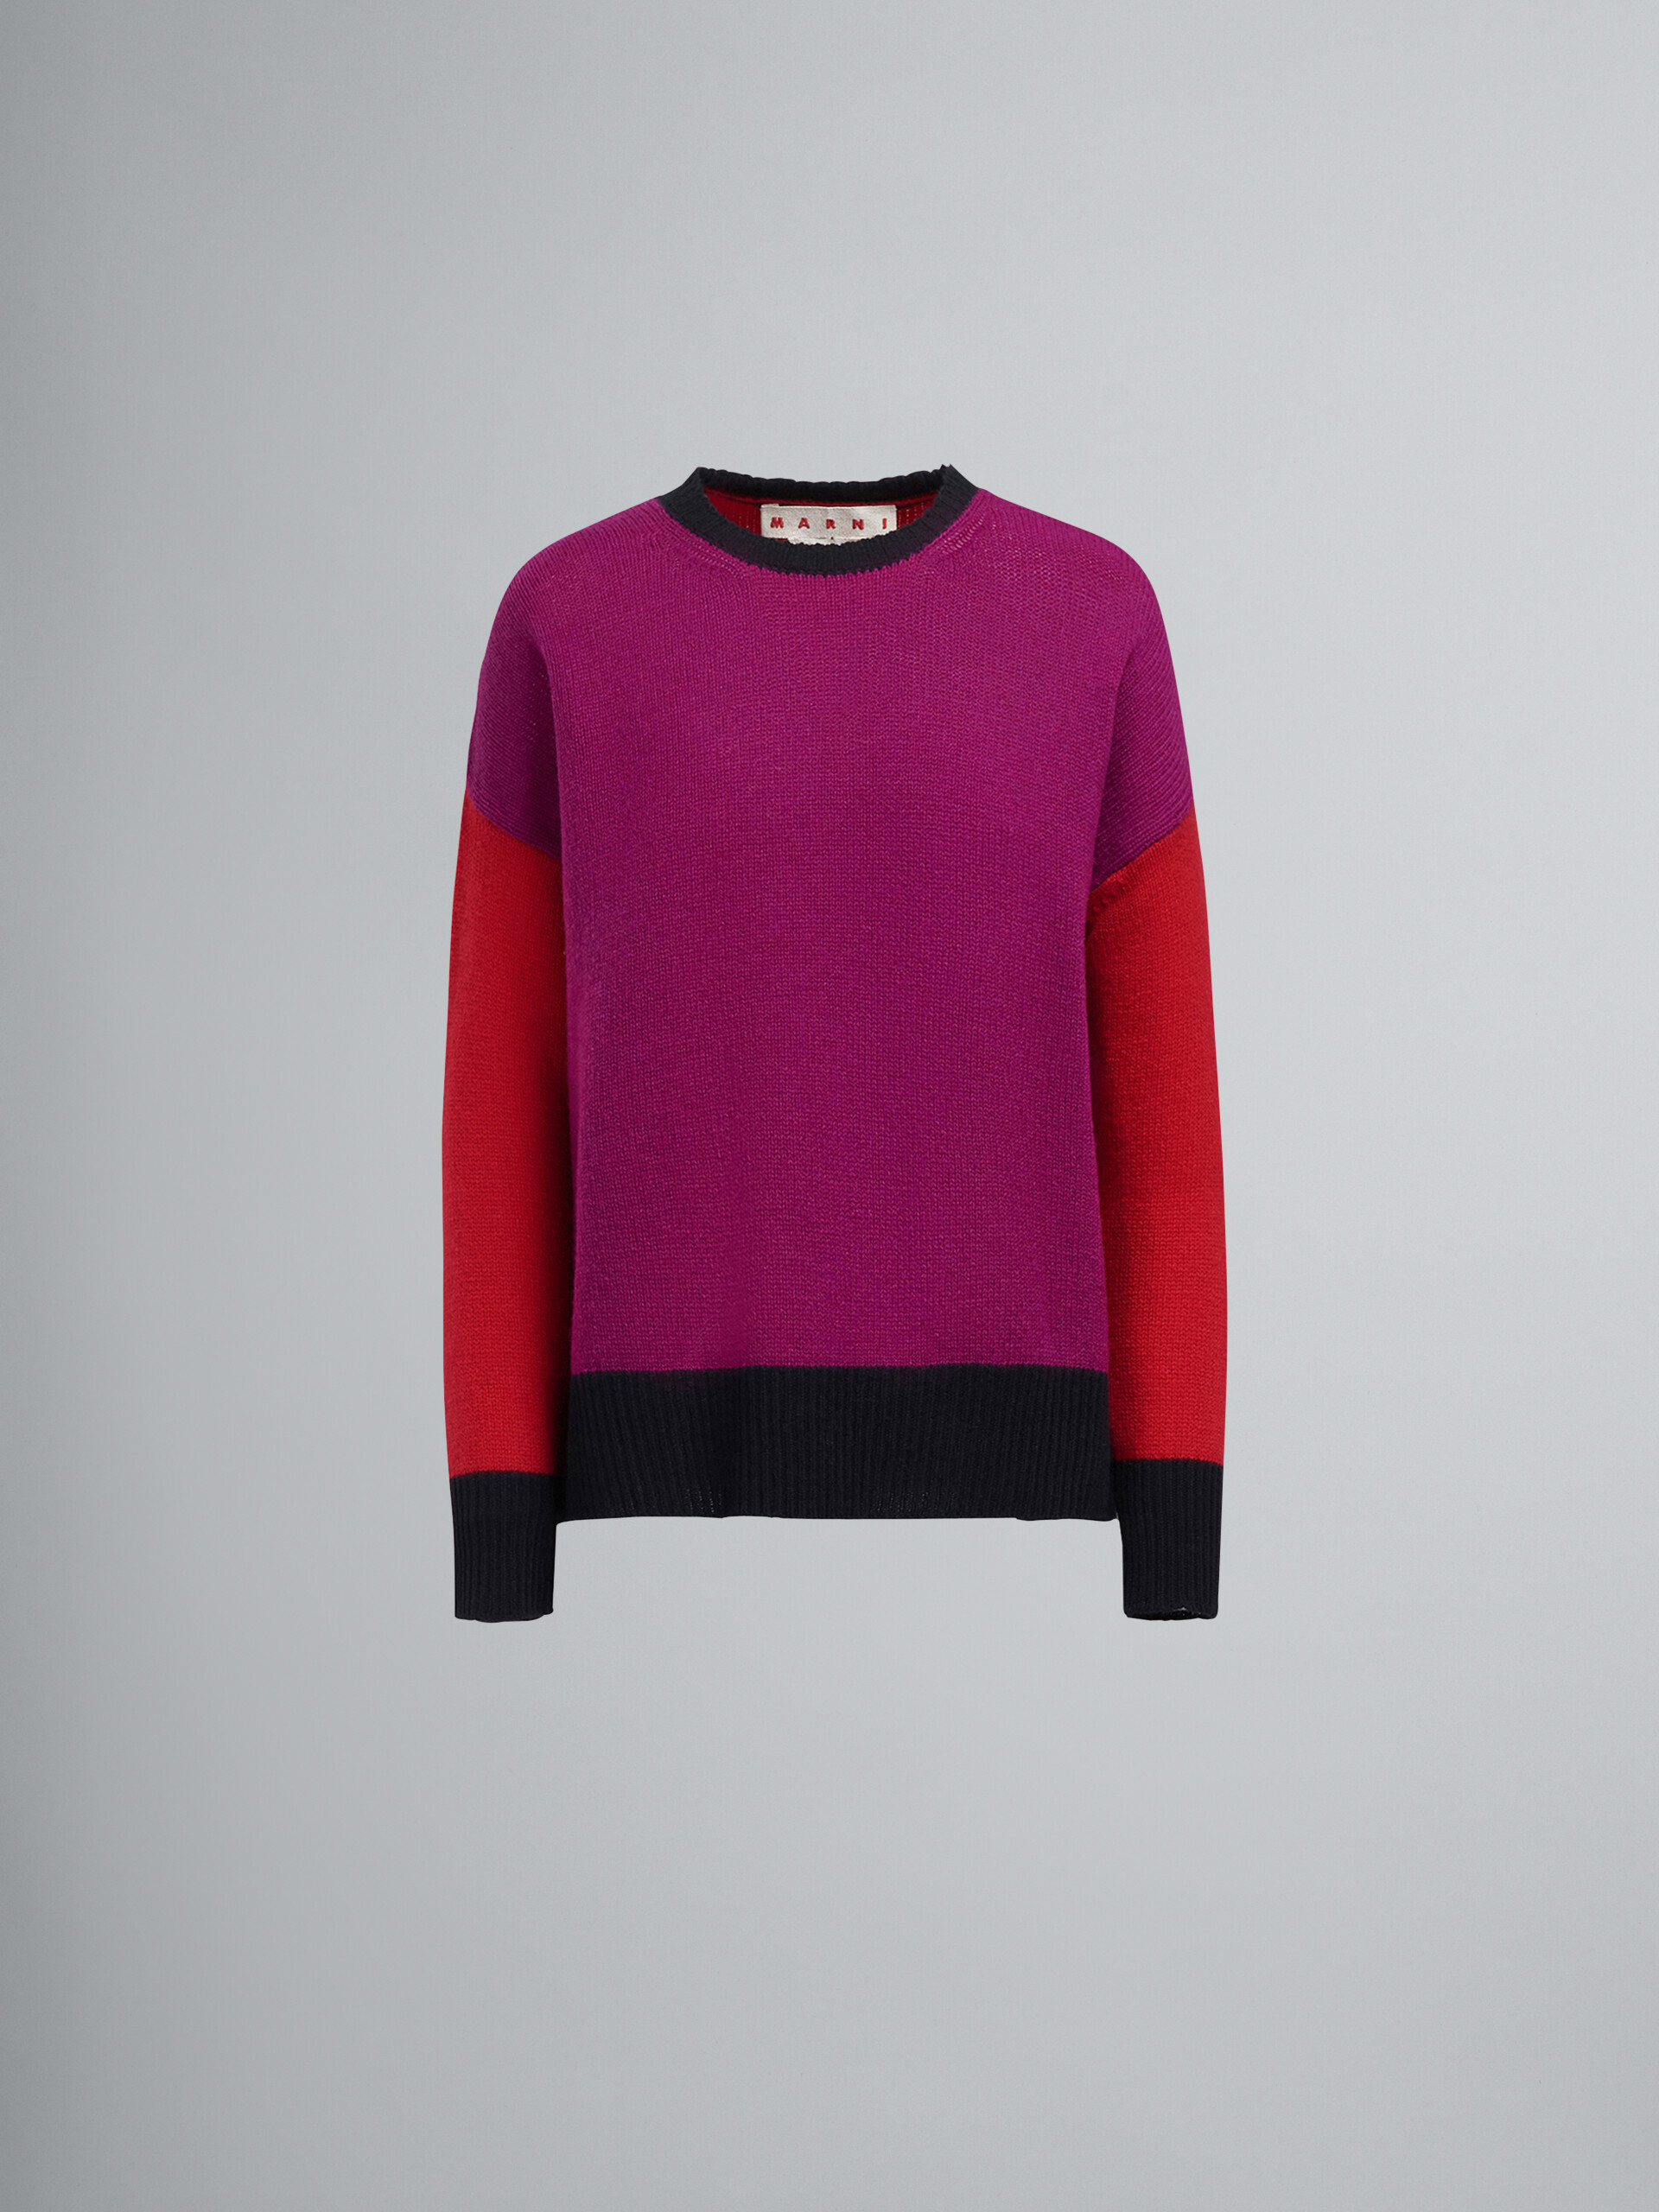 Pink cashmere crewneck sweater - Pullovers - Image 1